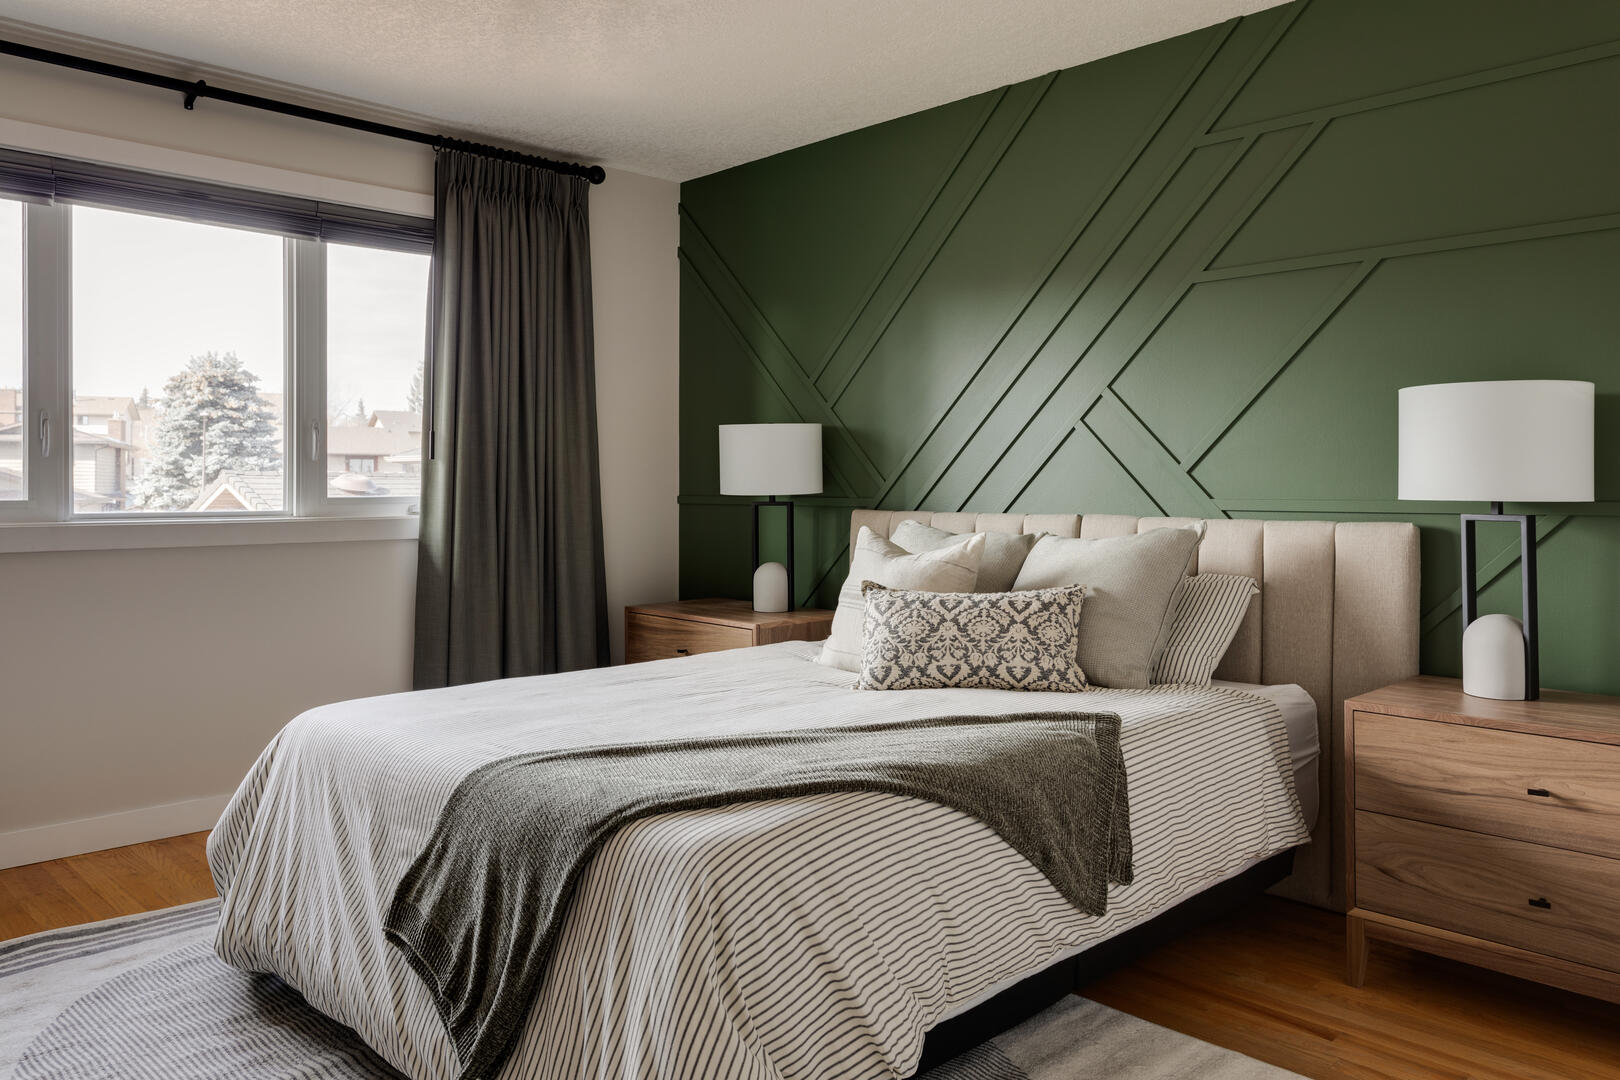 Bright primary bedroom with green accent wall, wood furniture and neutral decor